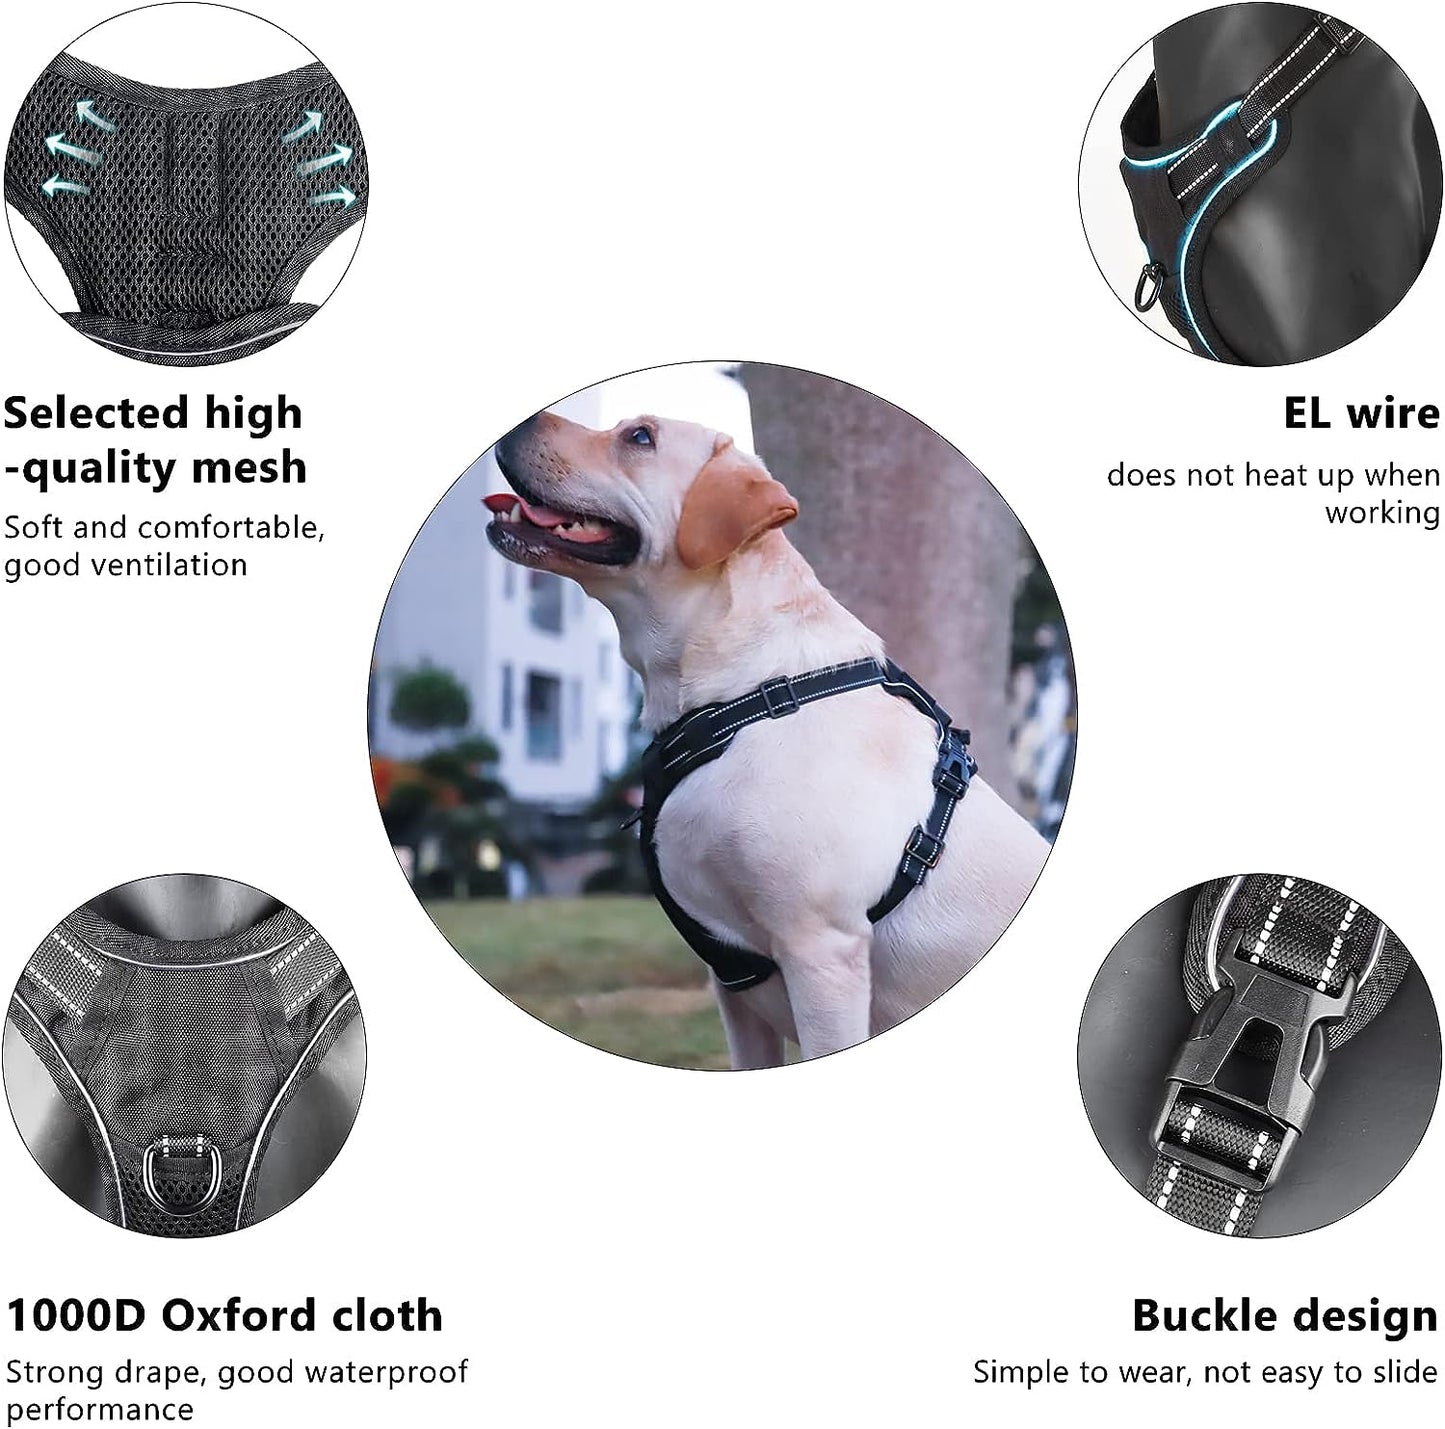 No Pull Dog Harness, KABIKIU Light up Dog Harness There Are 3 Light Modes with Control Handle and Reflective Strap, Adjustable Breathable Dog Vest Suitable for Small, Medium, Large Dogs(S)